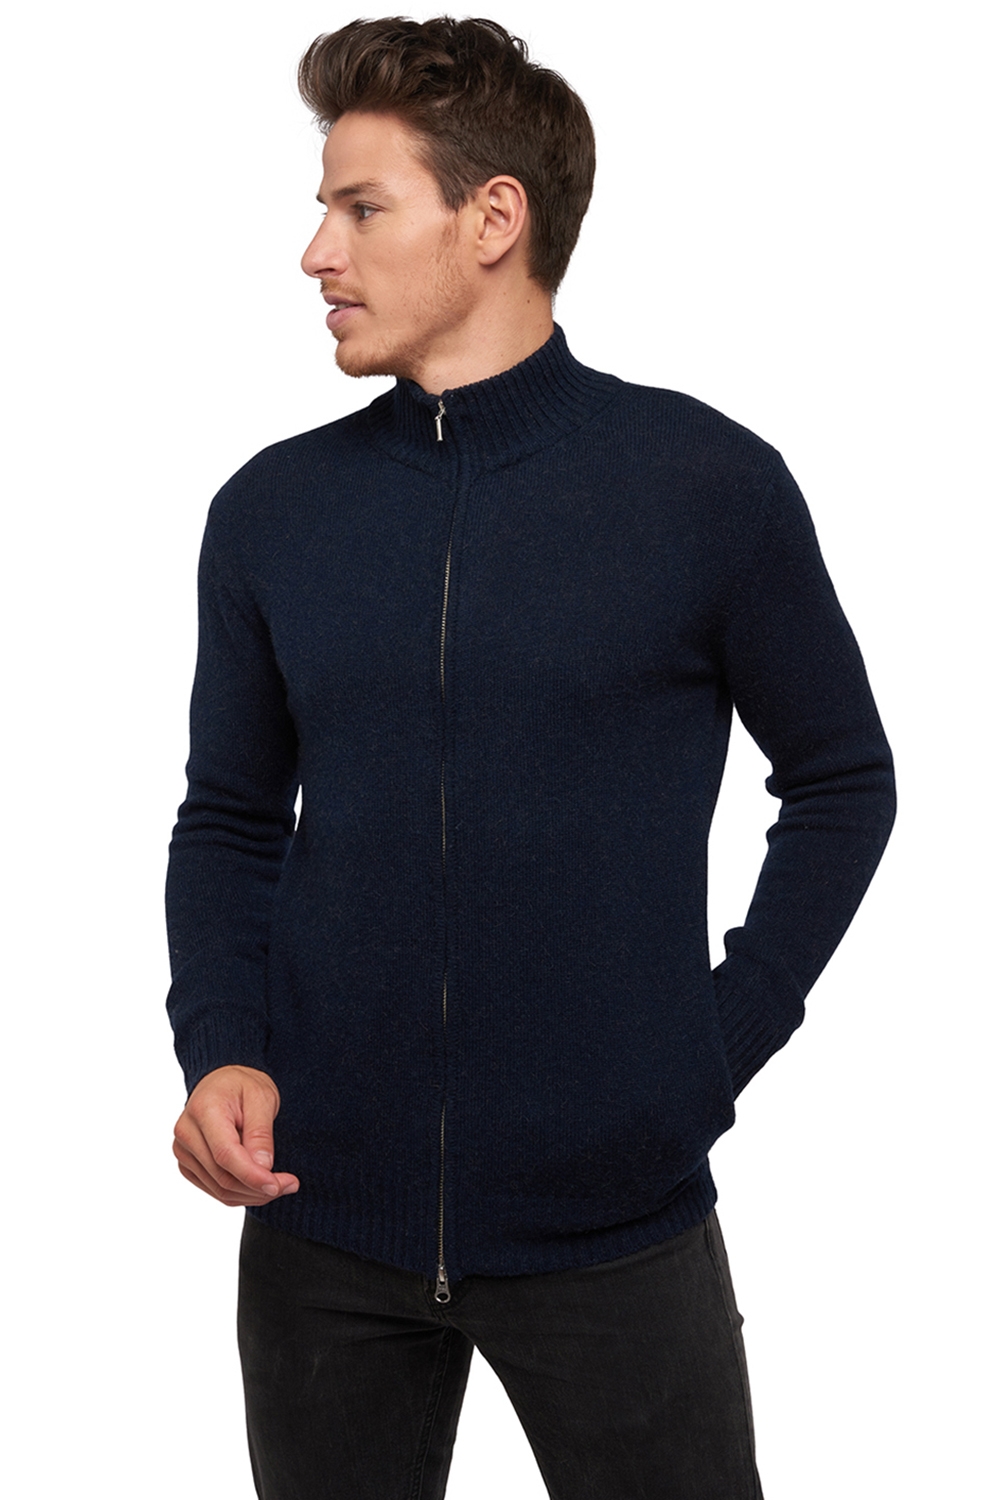 Chameau pull homme clyde marine 3xl